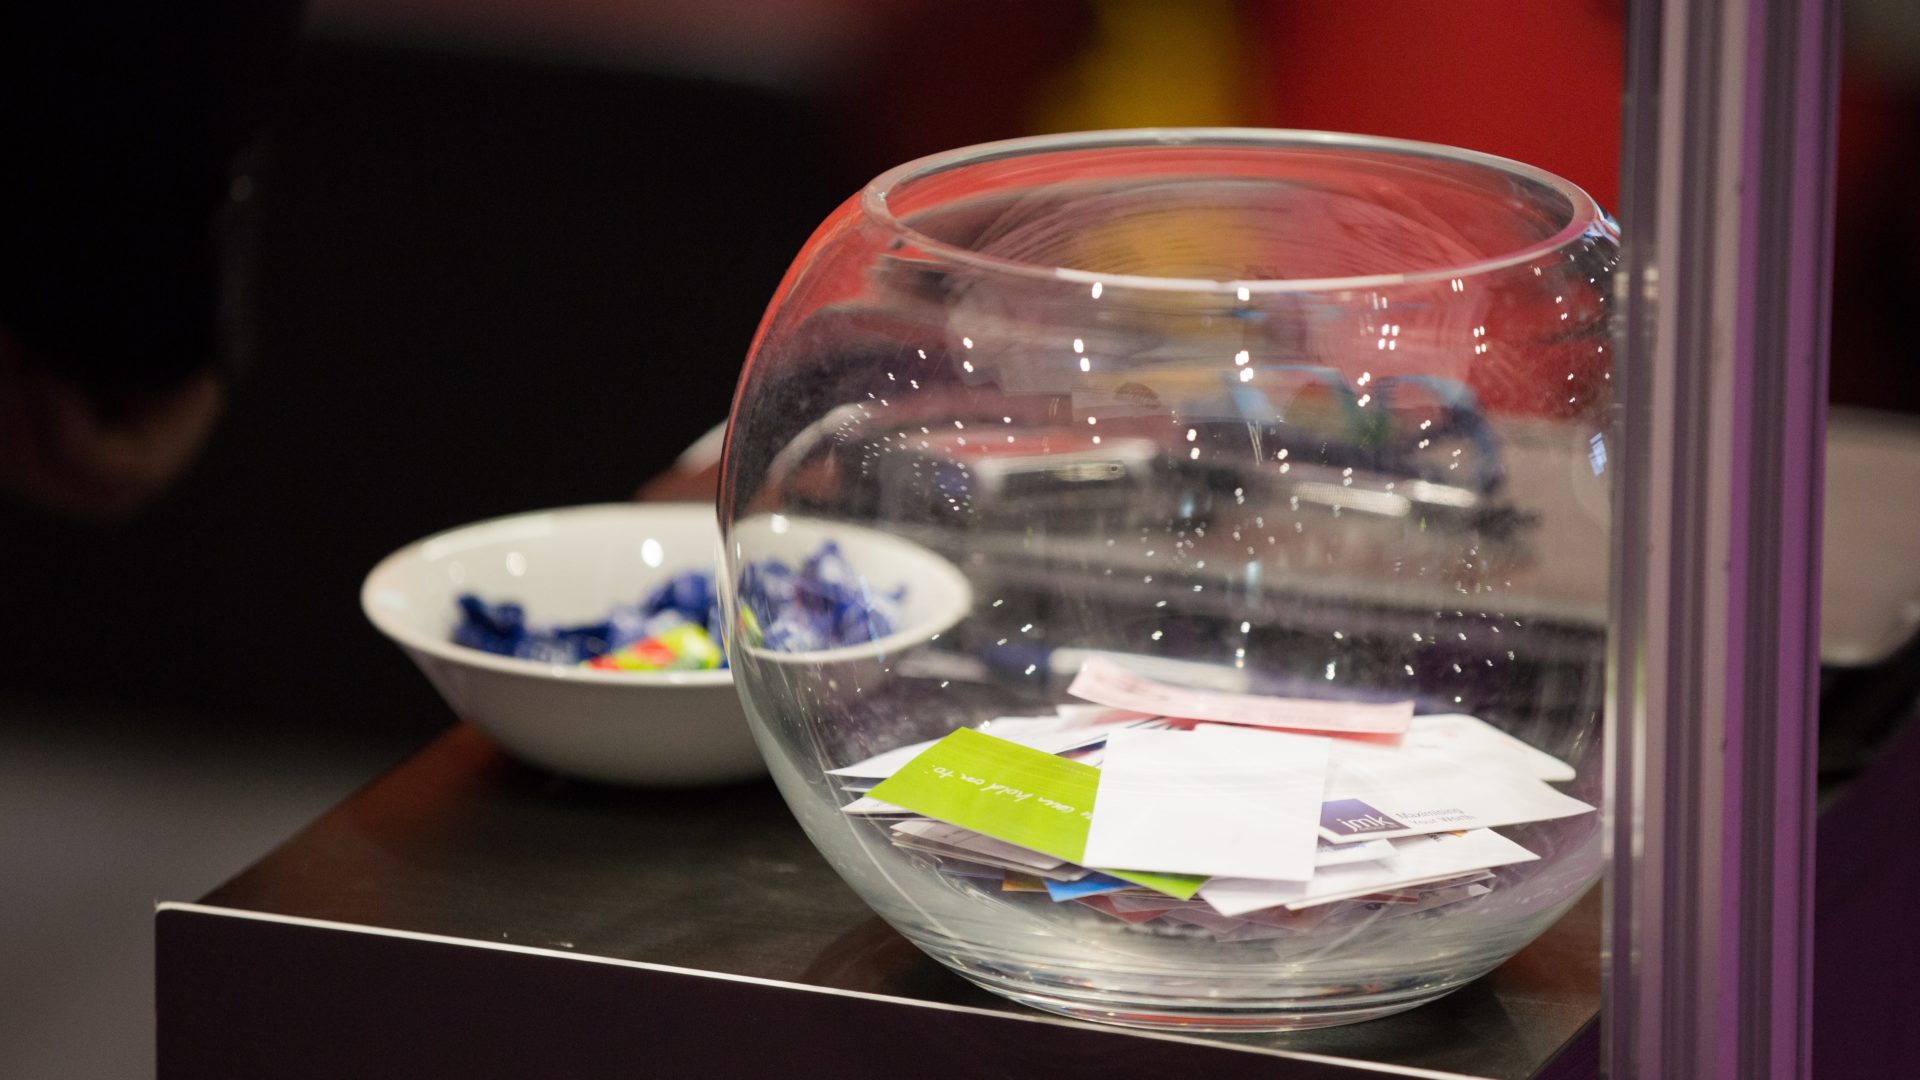 Business cards in a fish bowl.